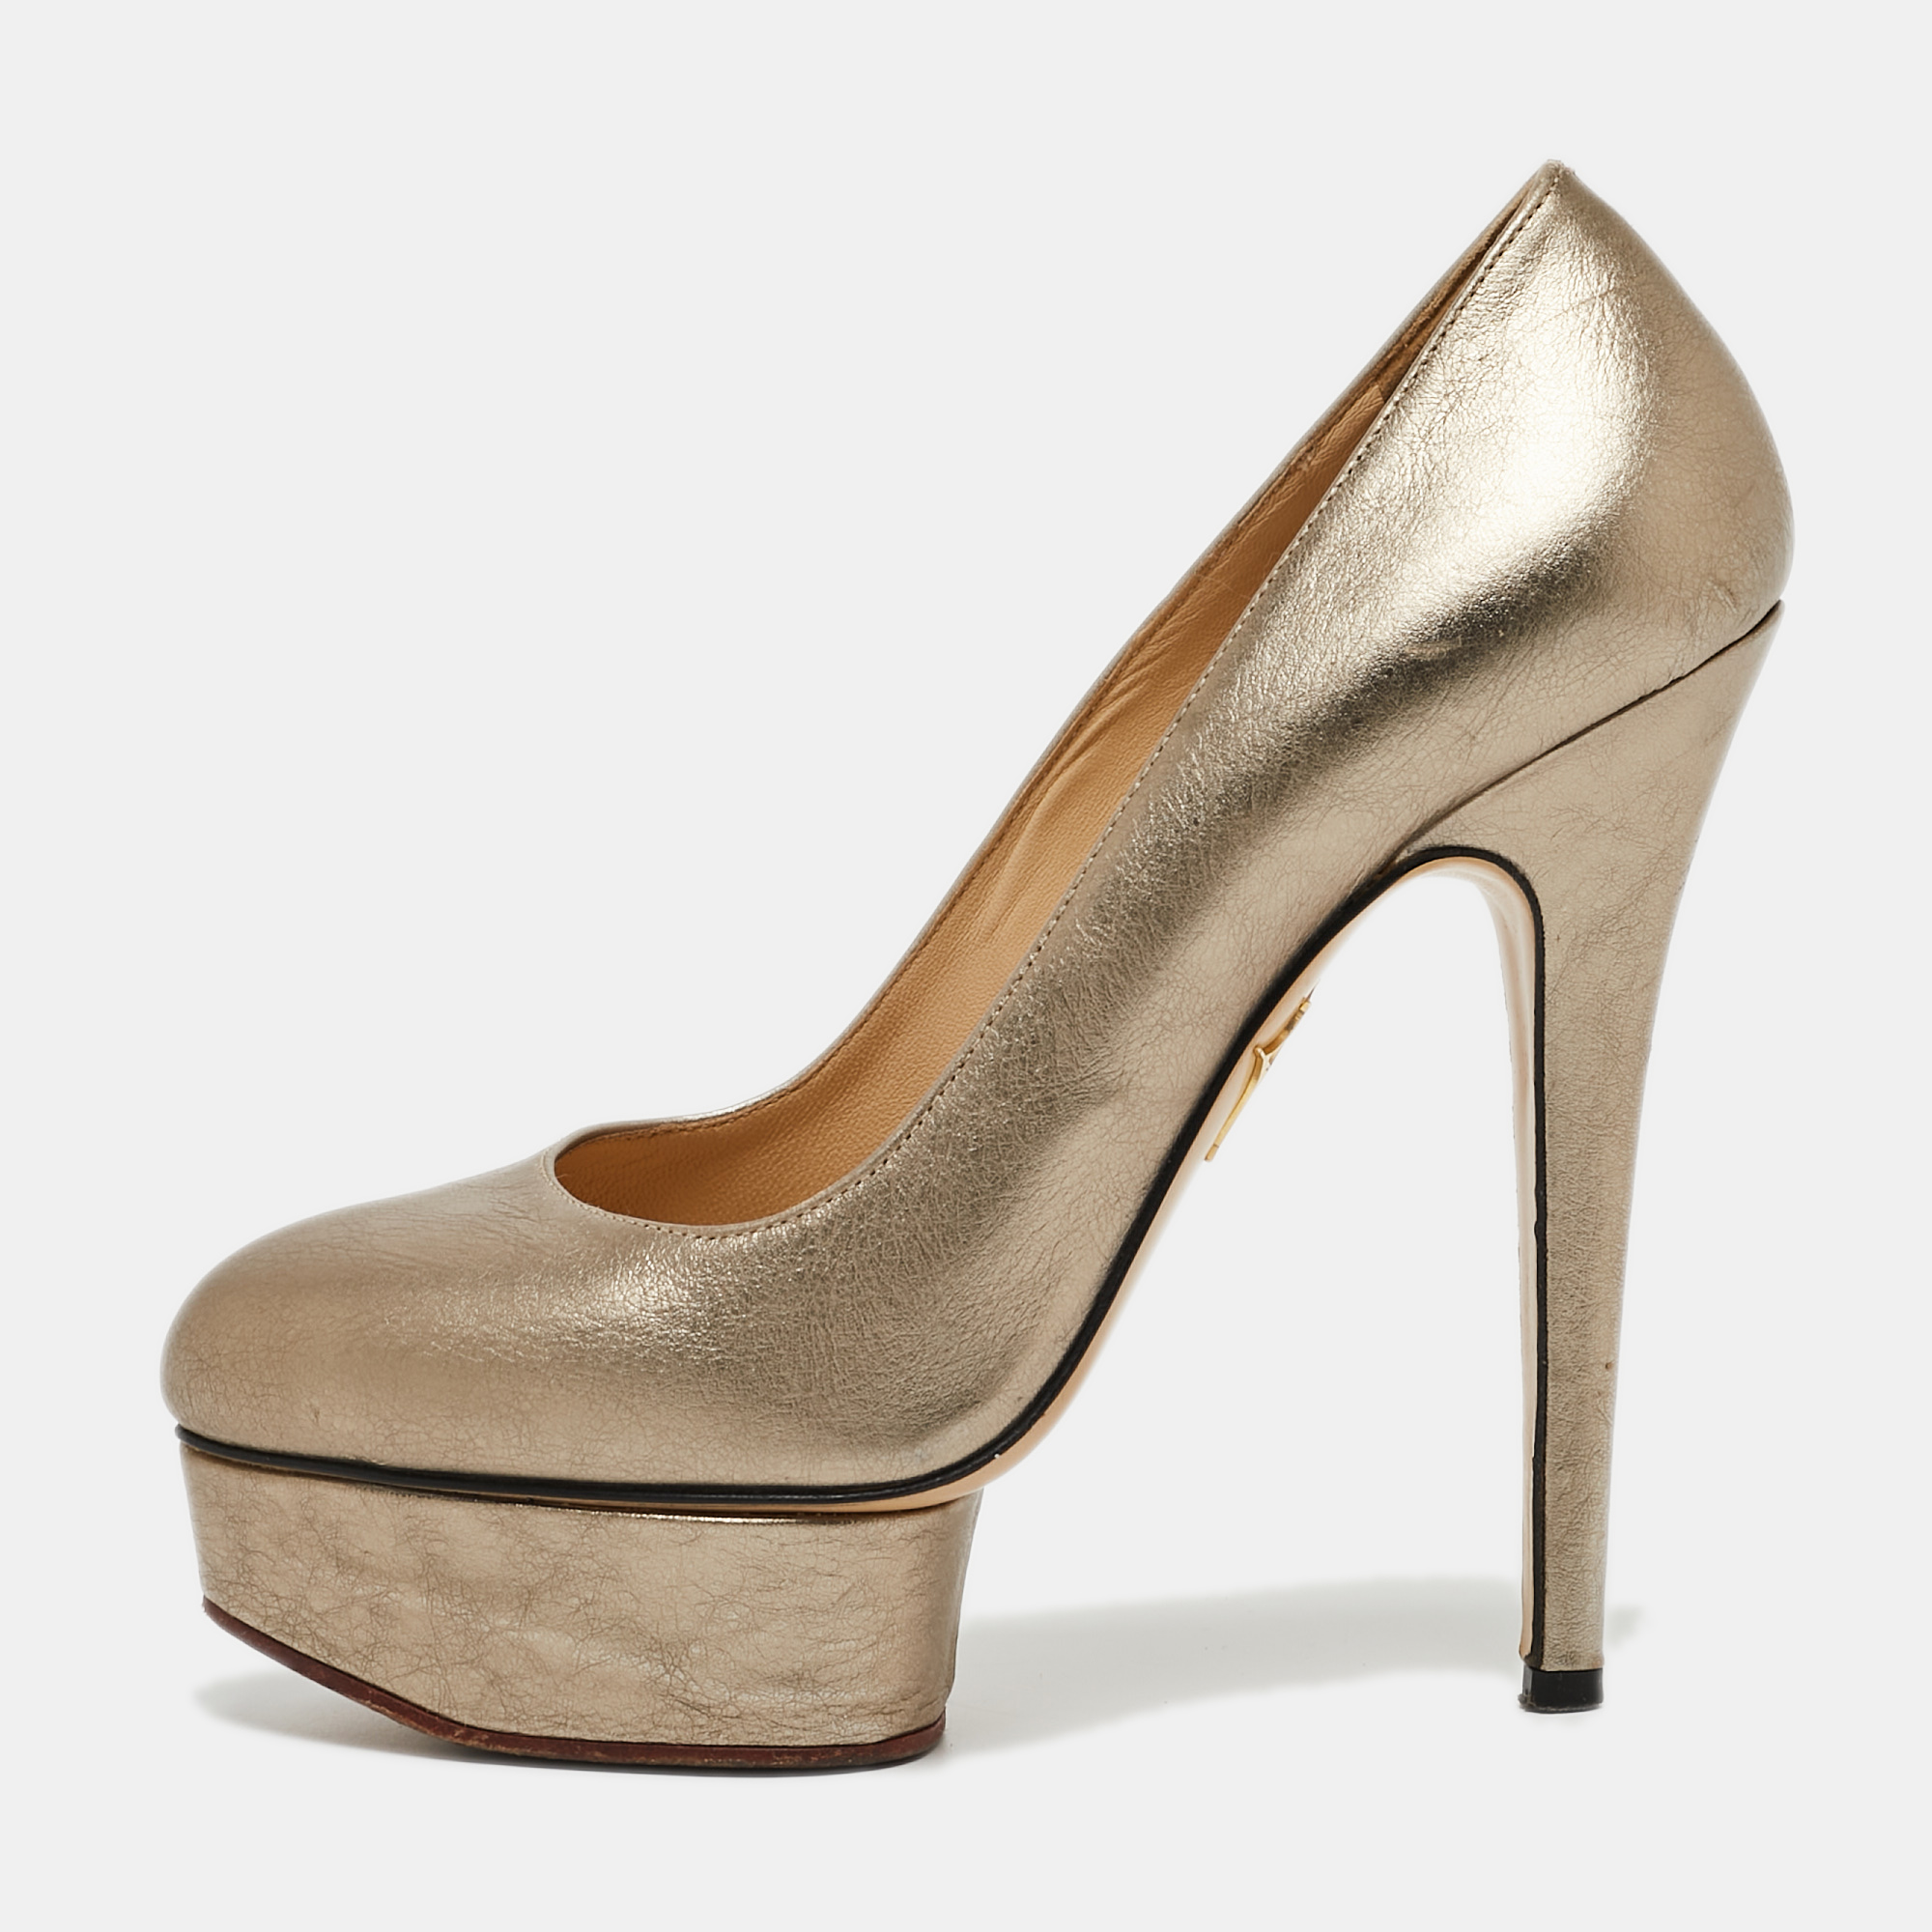 

Charlotte Olympia Metallic Leather Dolly Platform Pumps Size